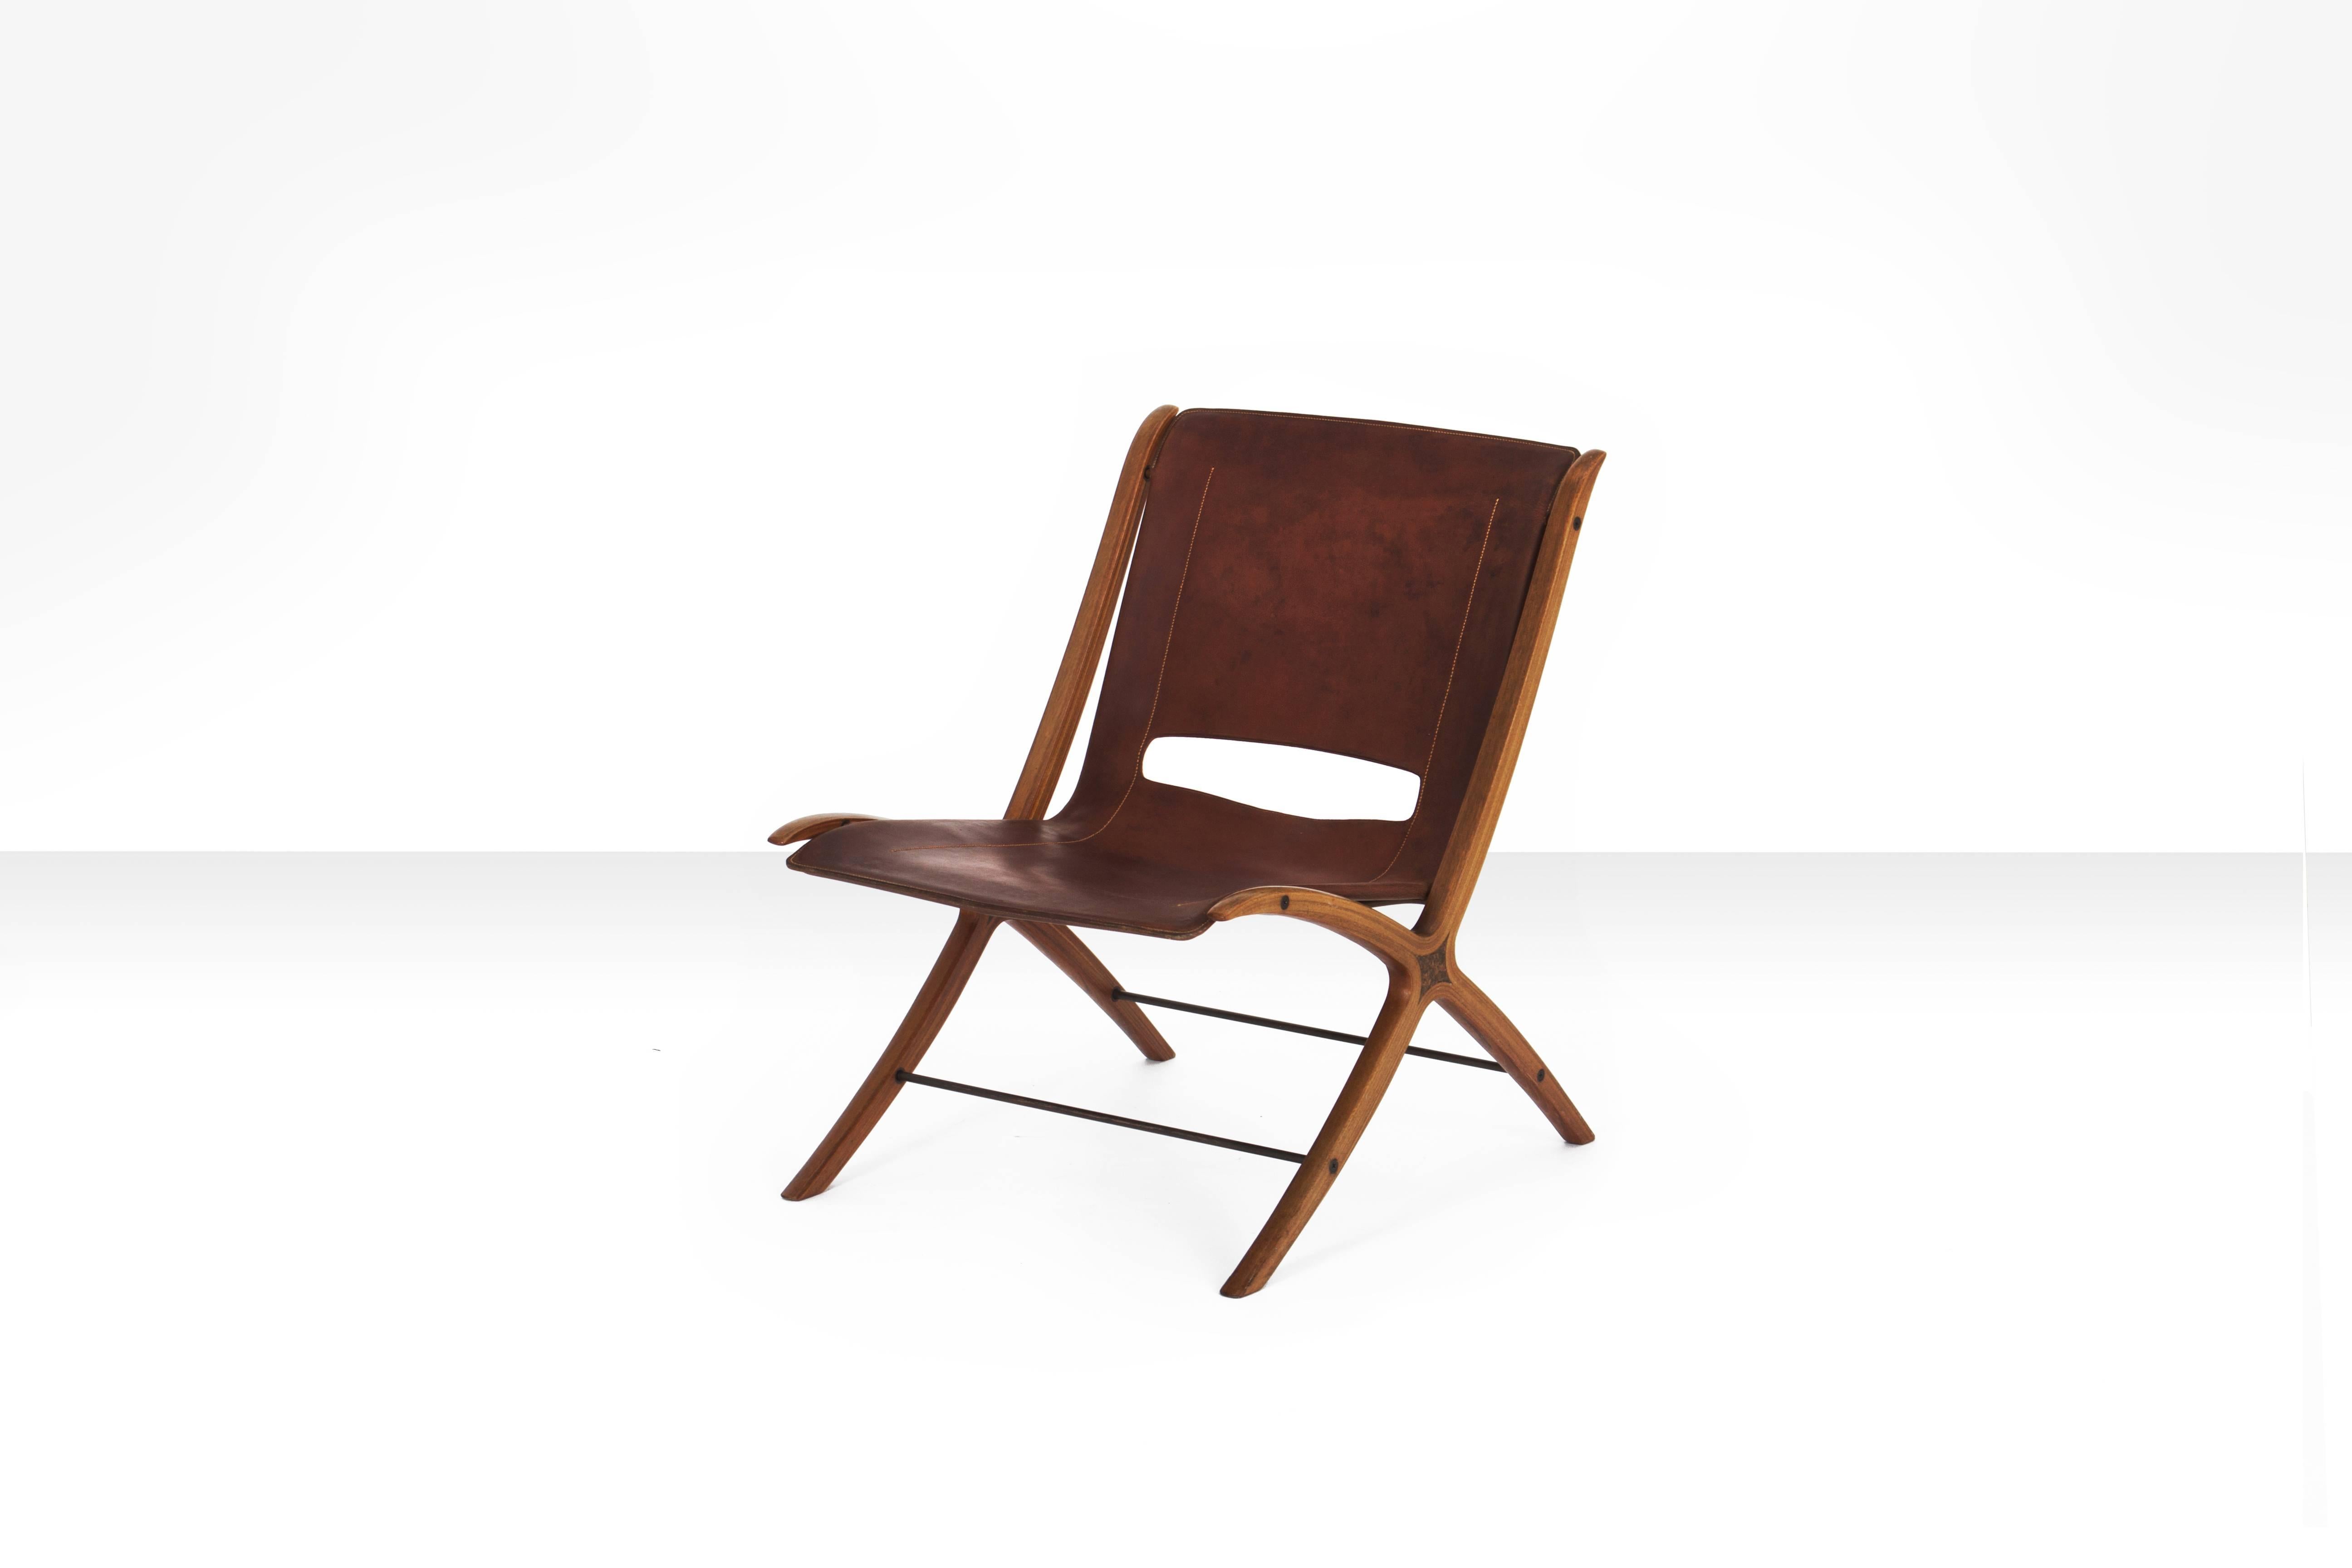 Beautiful X-chair designed by Peter Hvidt & Orla Mølgaard-Nielsen in cognac leather and mahogany. Produced by Fritz Hansen, Denmark 1950s-1960s.

Especially in cognac leather this work is very rare. 

Condition:
Item is in beautiful vintage